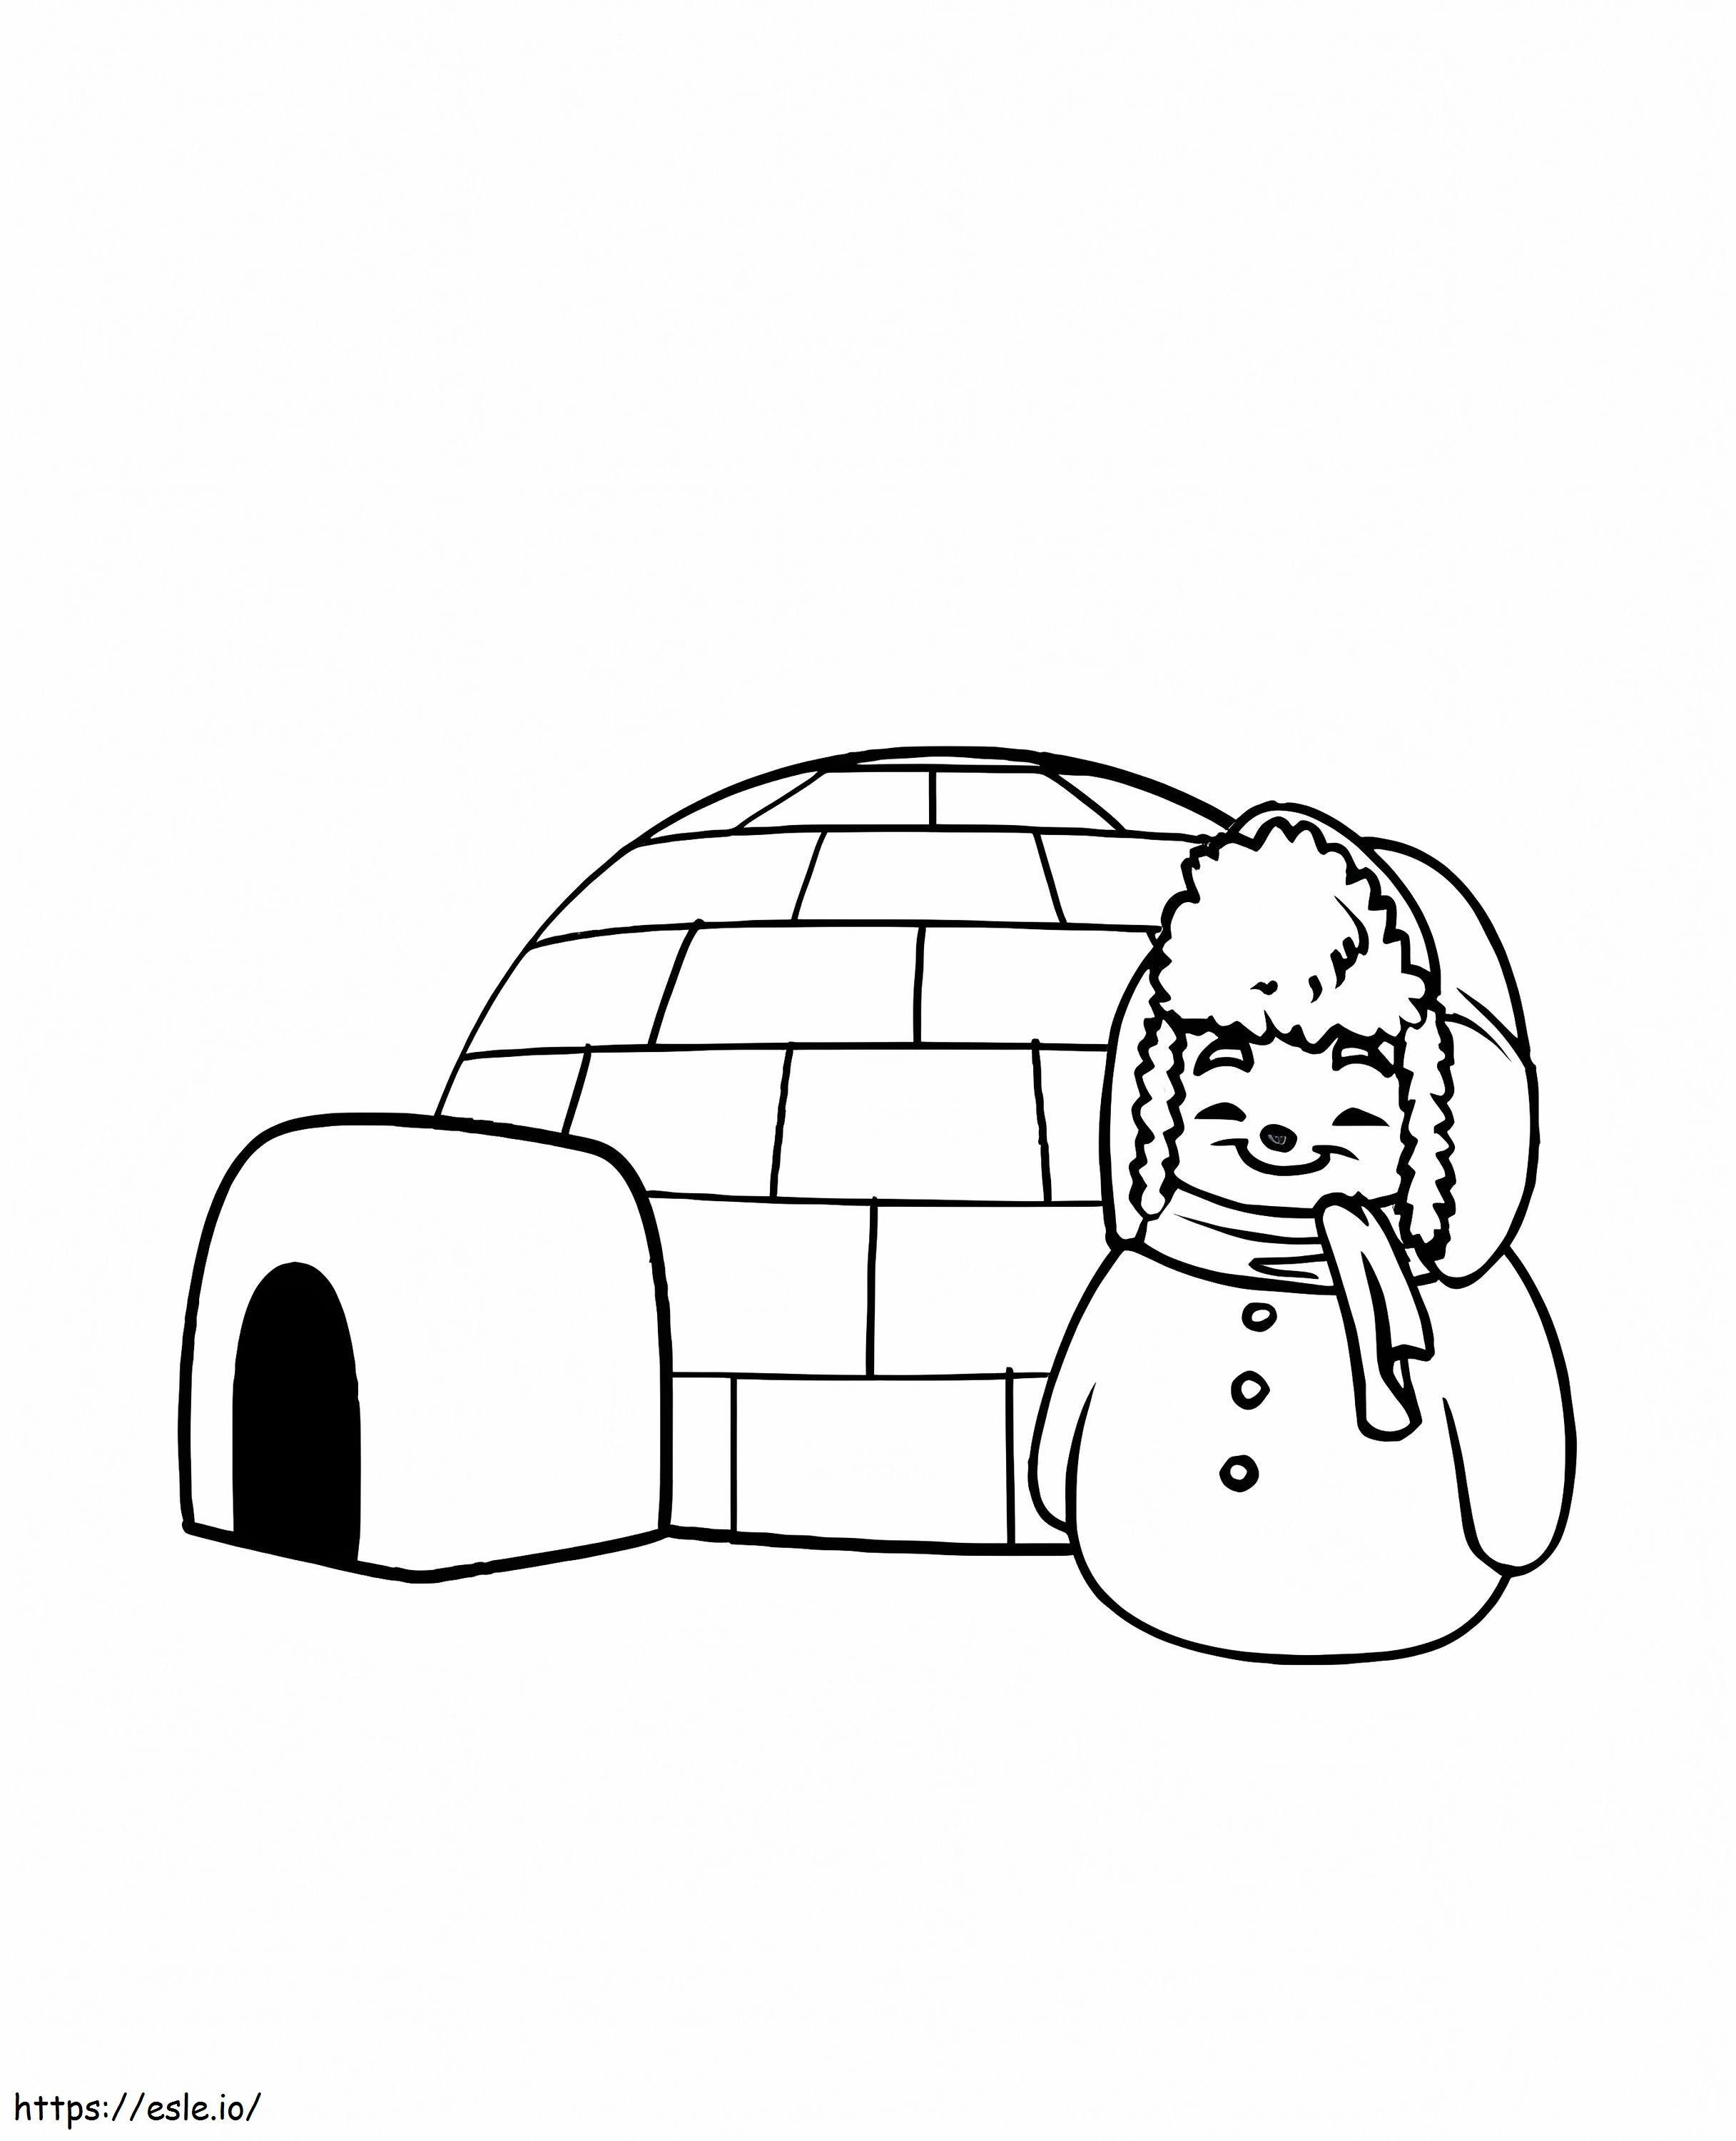 Living In An Igloo coloring page